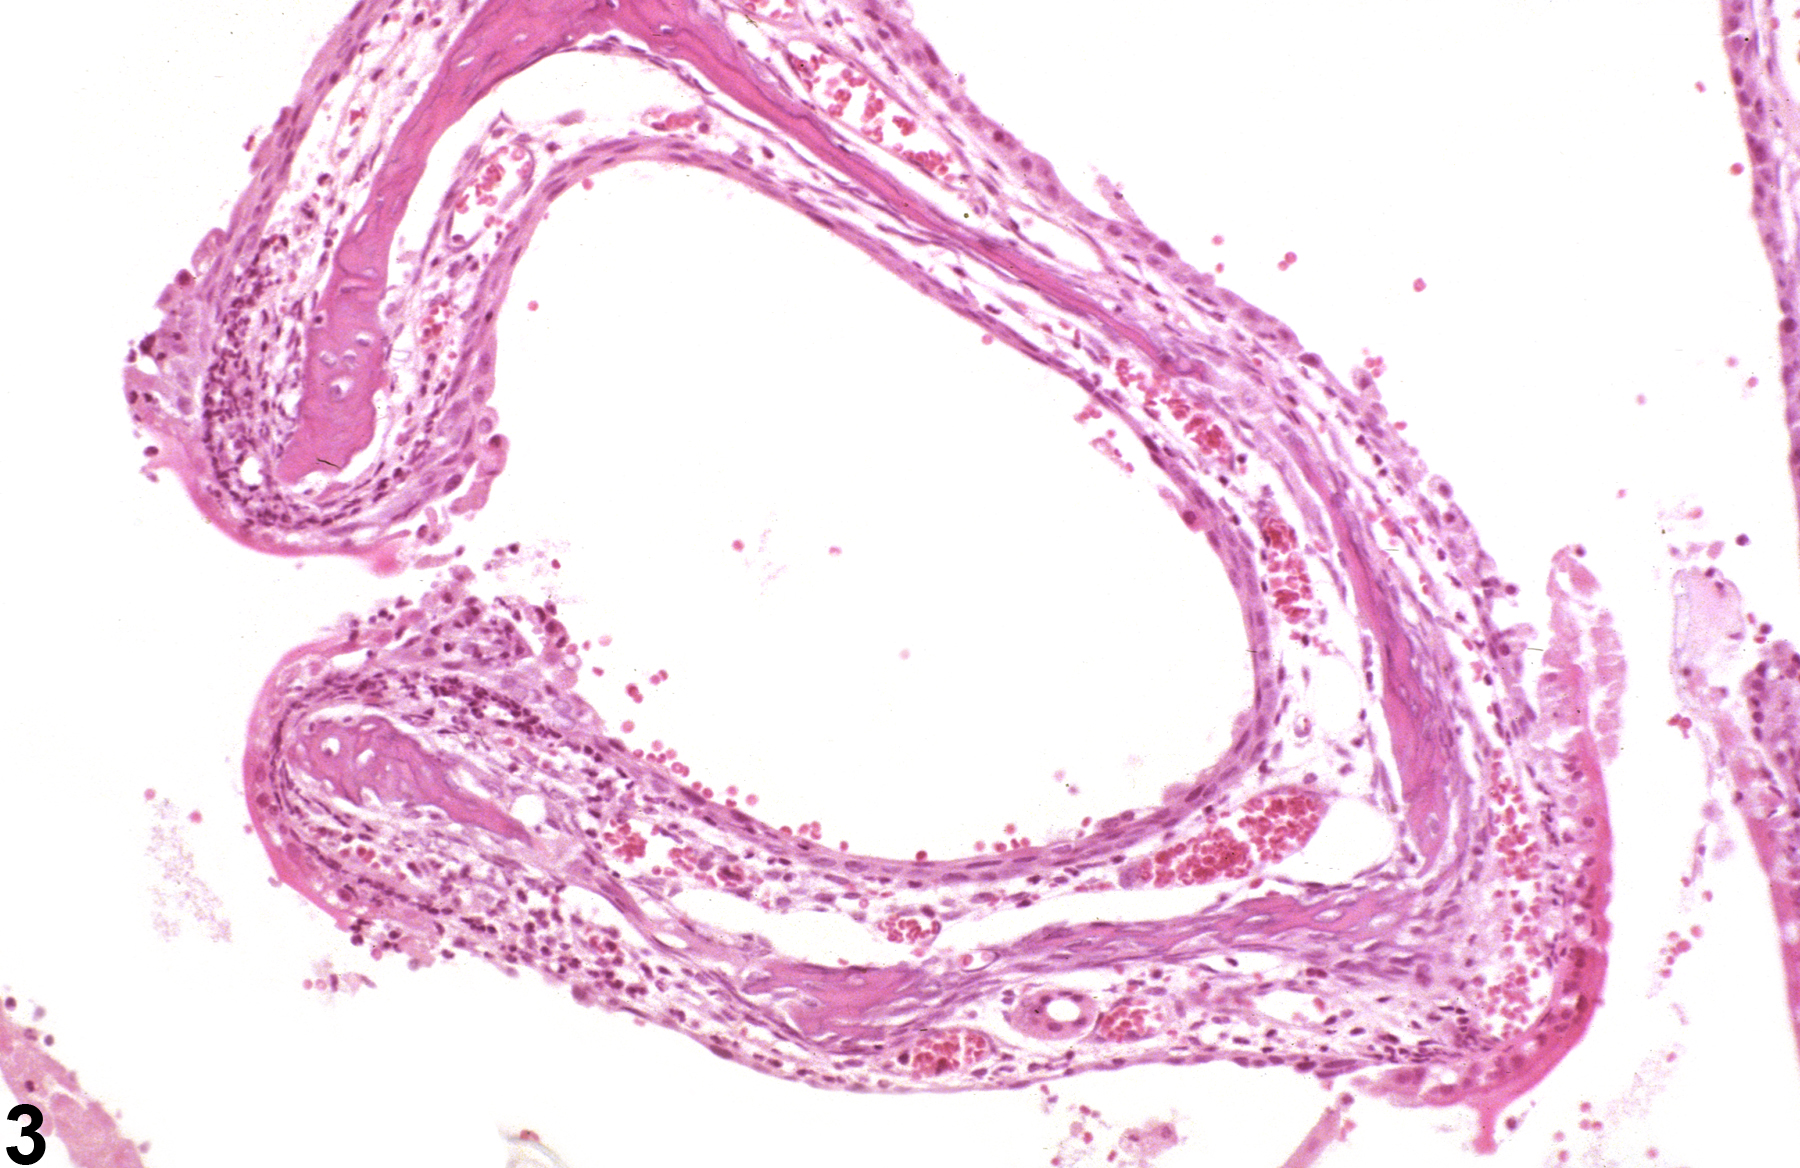 Image of necrosis in the nose, transitional epithelium from a  B6C3F1/N mouse in a subchronic study